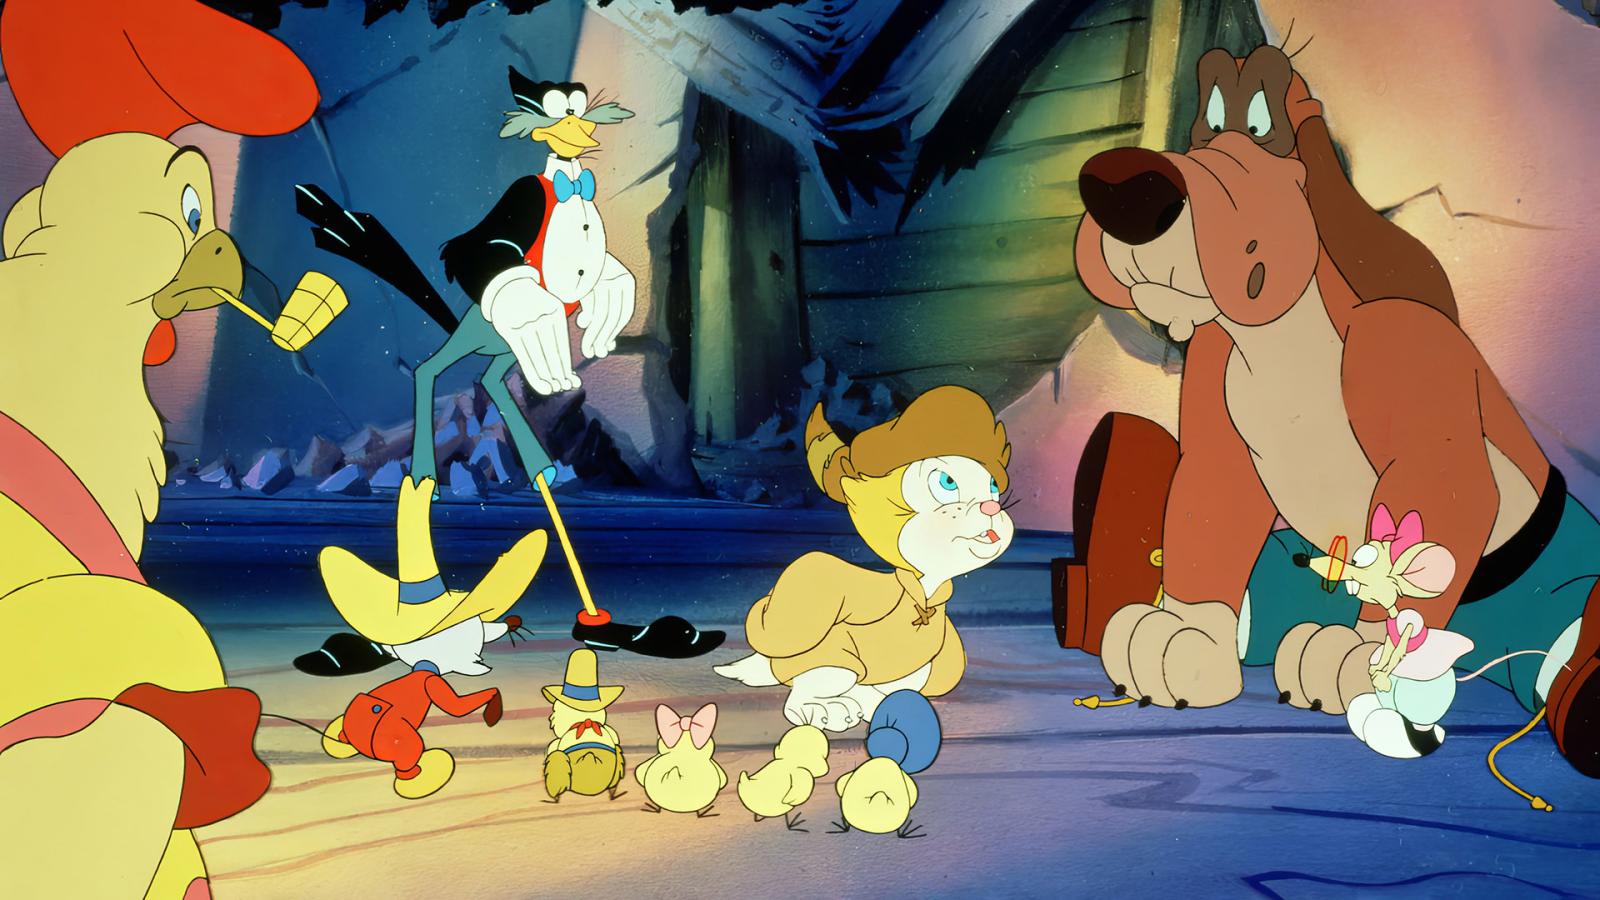 10 Underrated Animated Movies from the '90s You've Missed - image 6